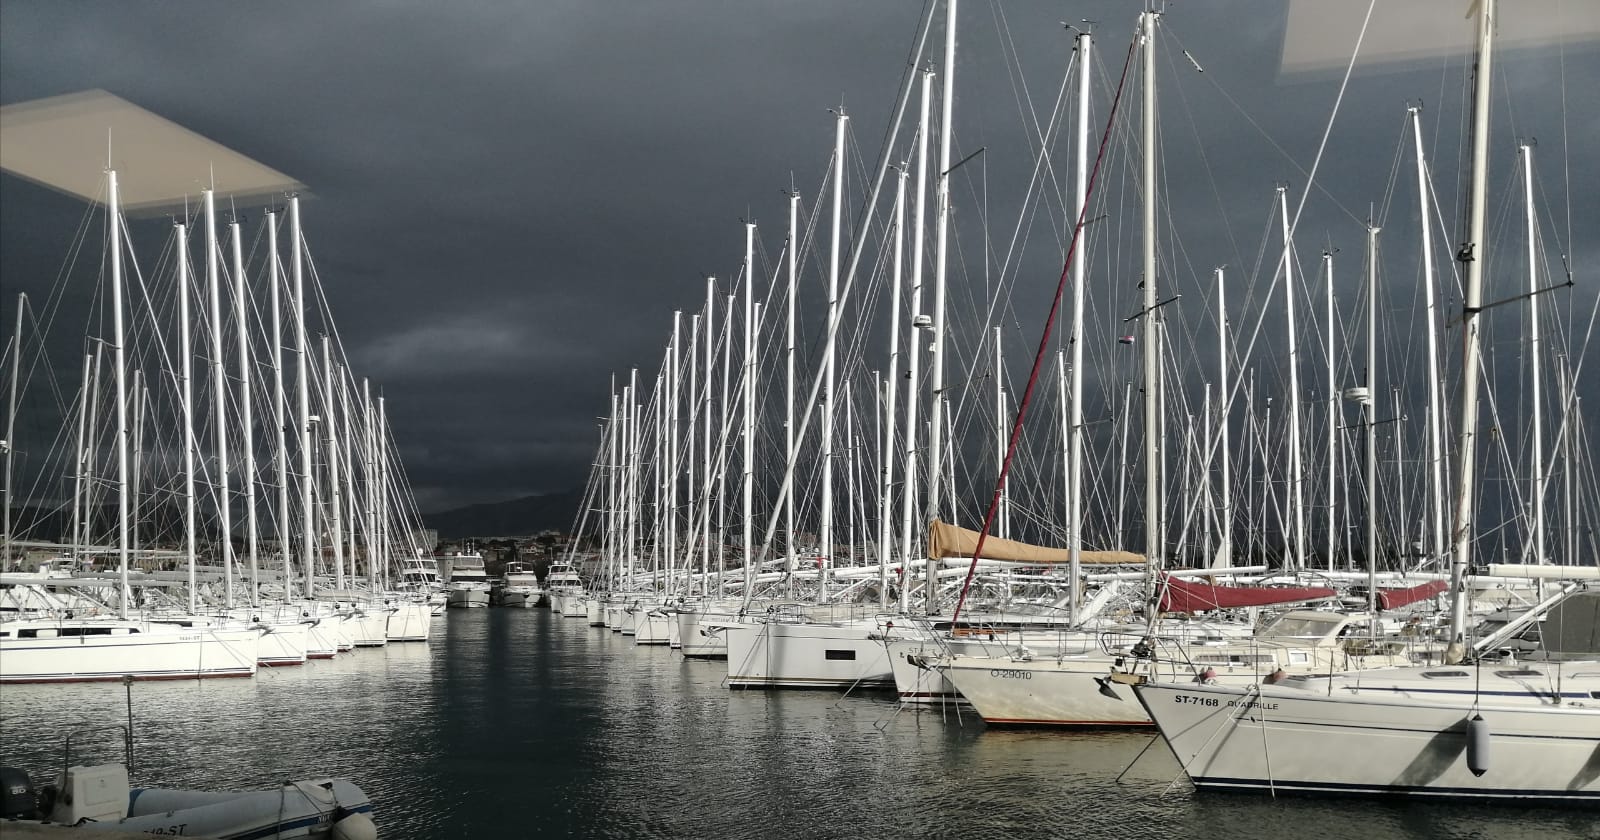 The view from our office in the marina on a rainy day